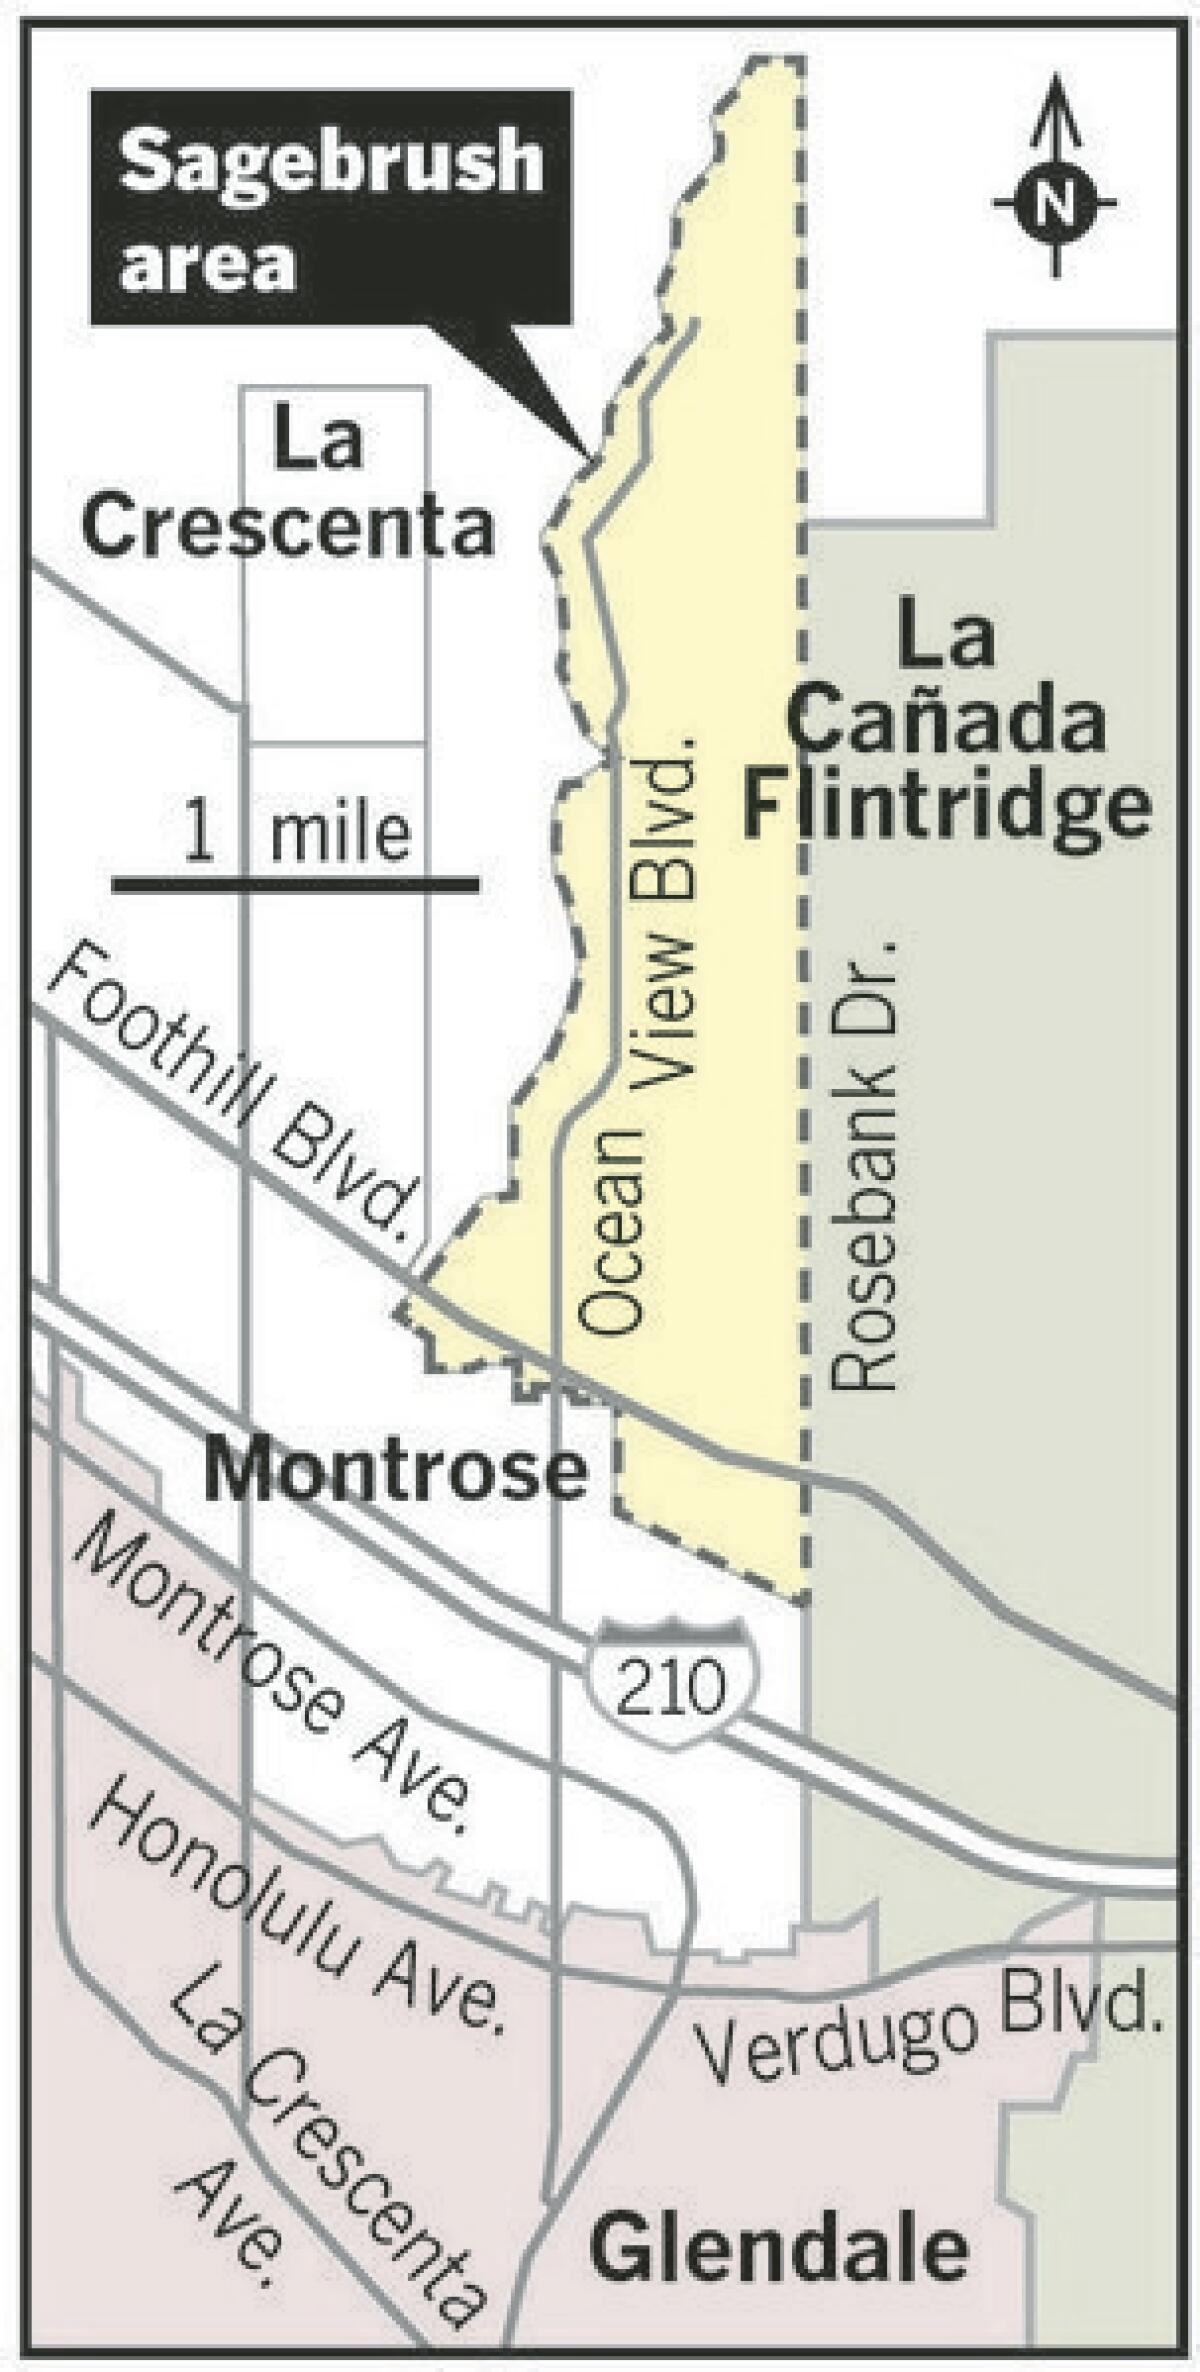 The following illustration shows the "Sagebrush" region, which falls in Glendale UnifiedÃƒâ€šÃ‚Â¿s boundaries. Parents who live in the area have fought for decades for the opportunity to enroll their children in La CaÃƒÆ’Ã‚Â±ada schools. A group of citizens recently formed to initiate the process once again.